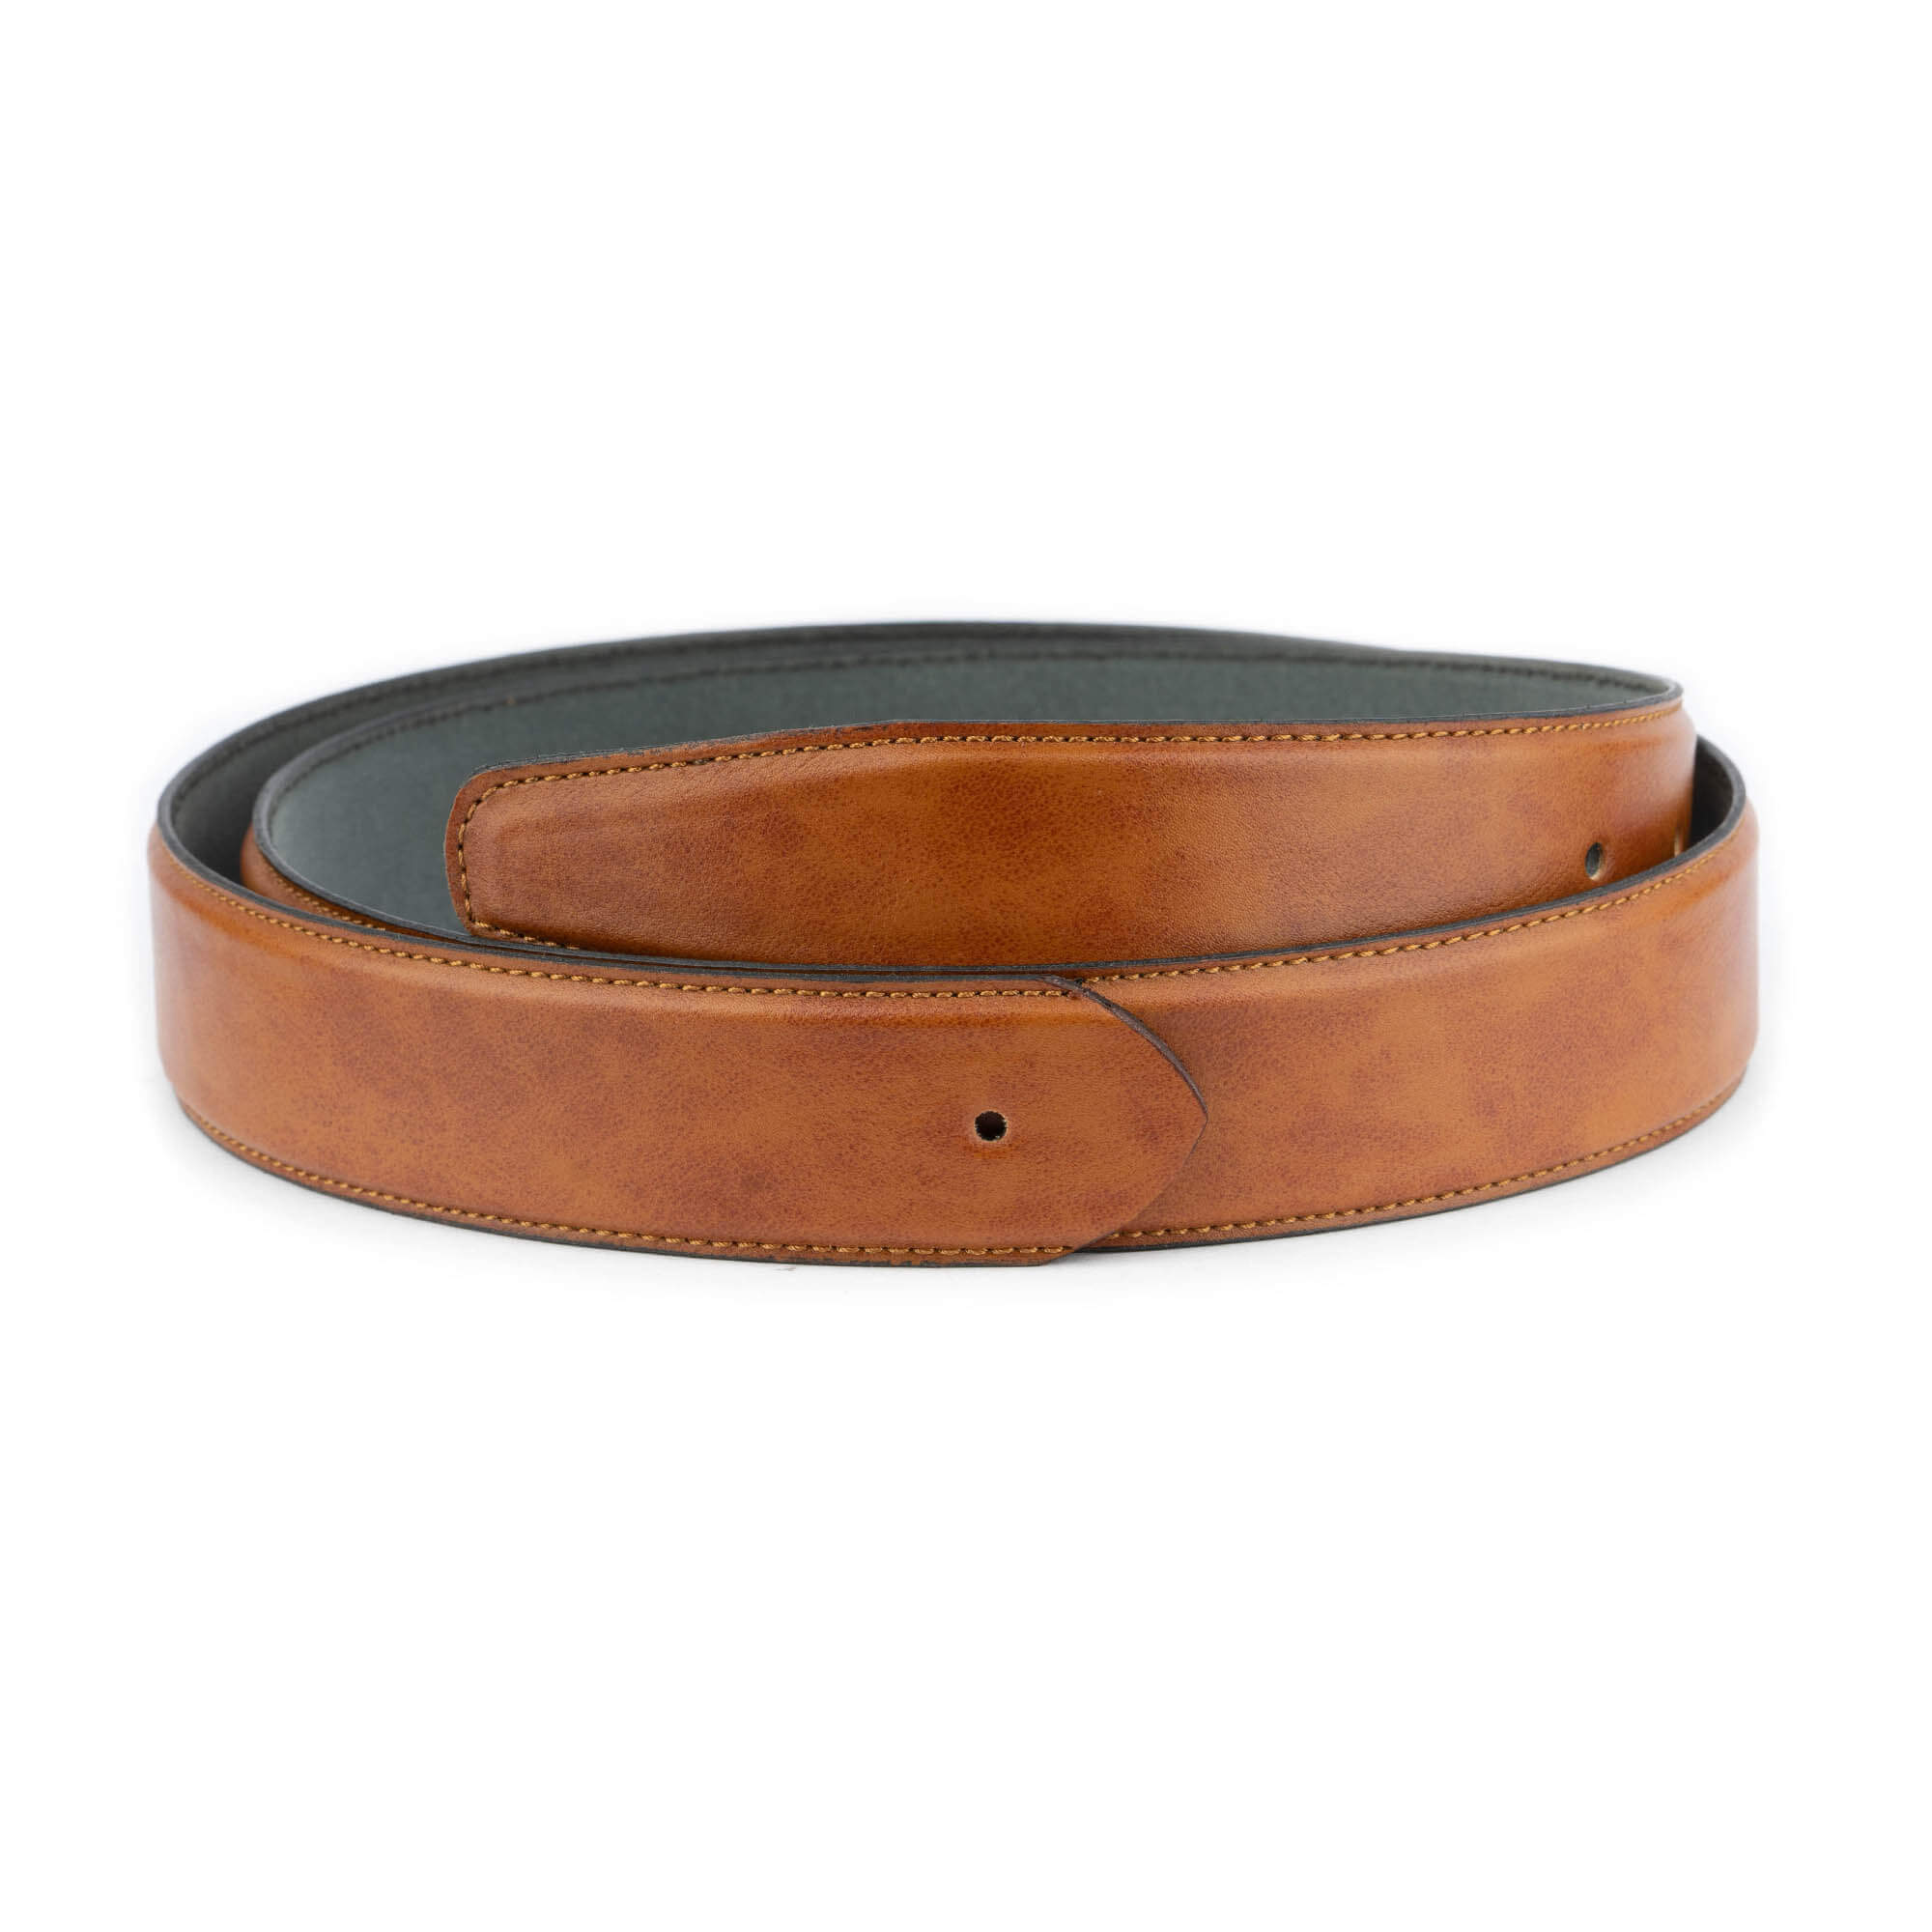 Buy Light Brown Leather Replacement Belt Strap Without Buckle ...